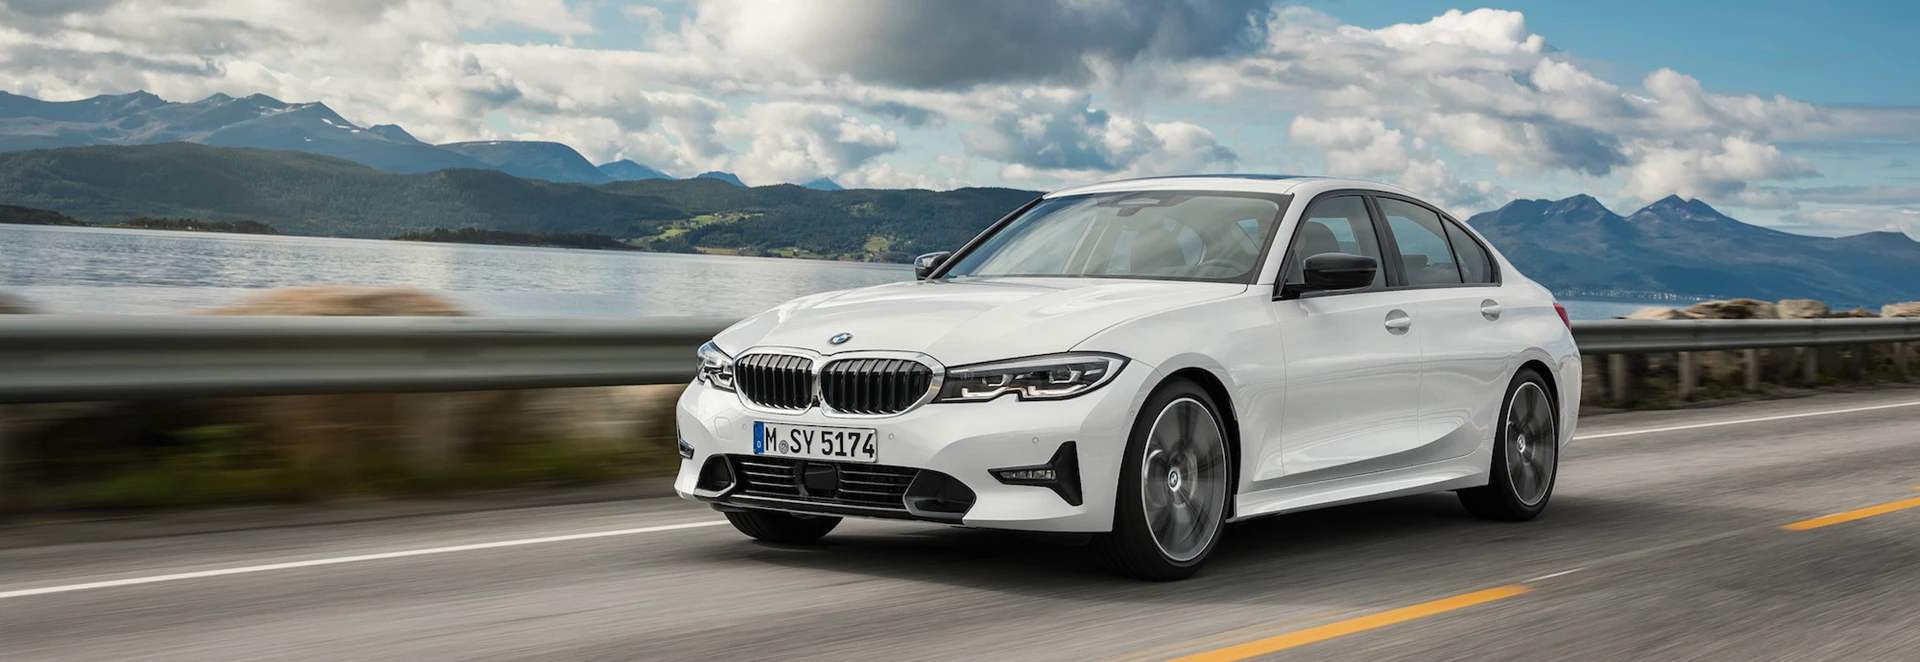 2019 BMW 3 Series: Here's what has changed - Car Keys